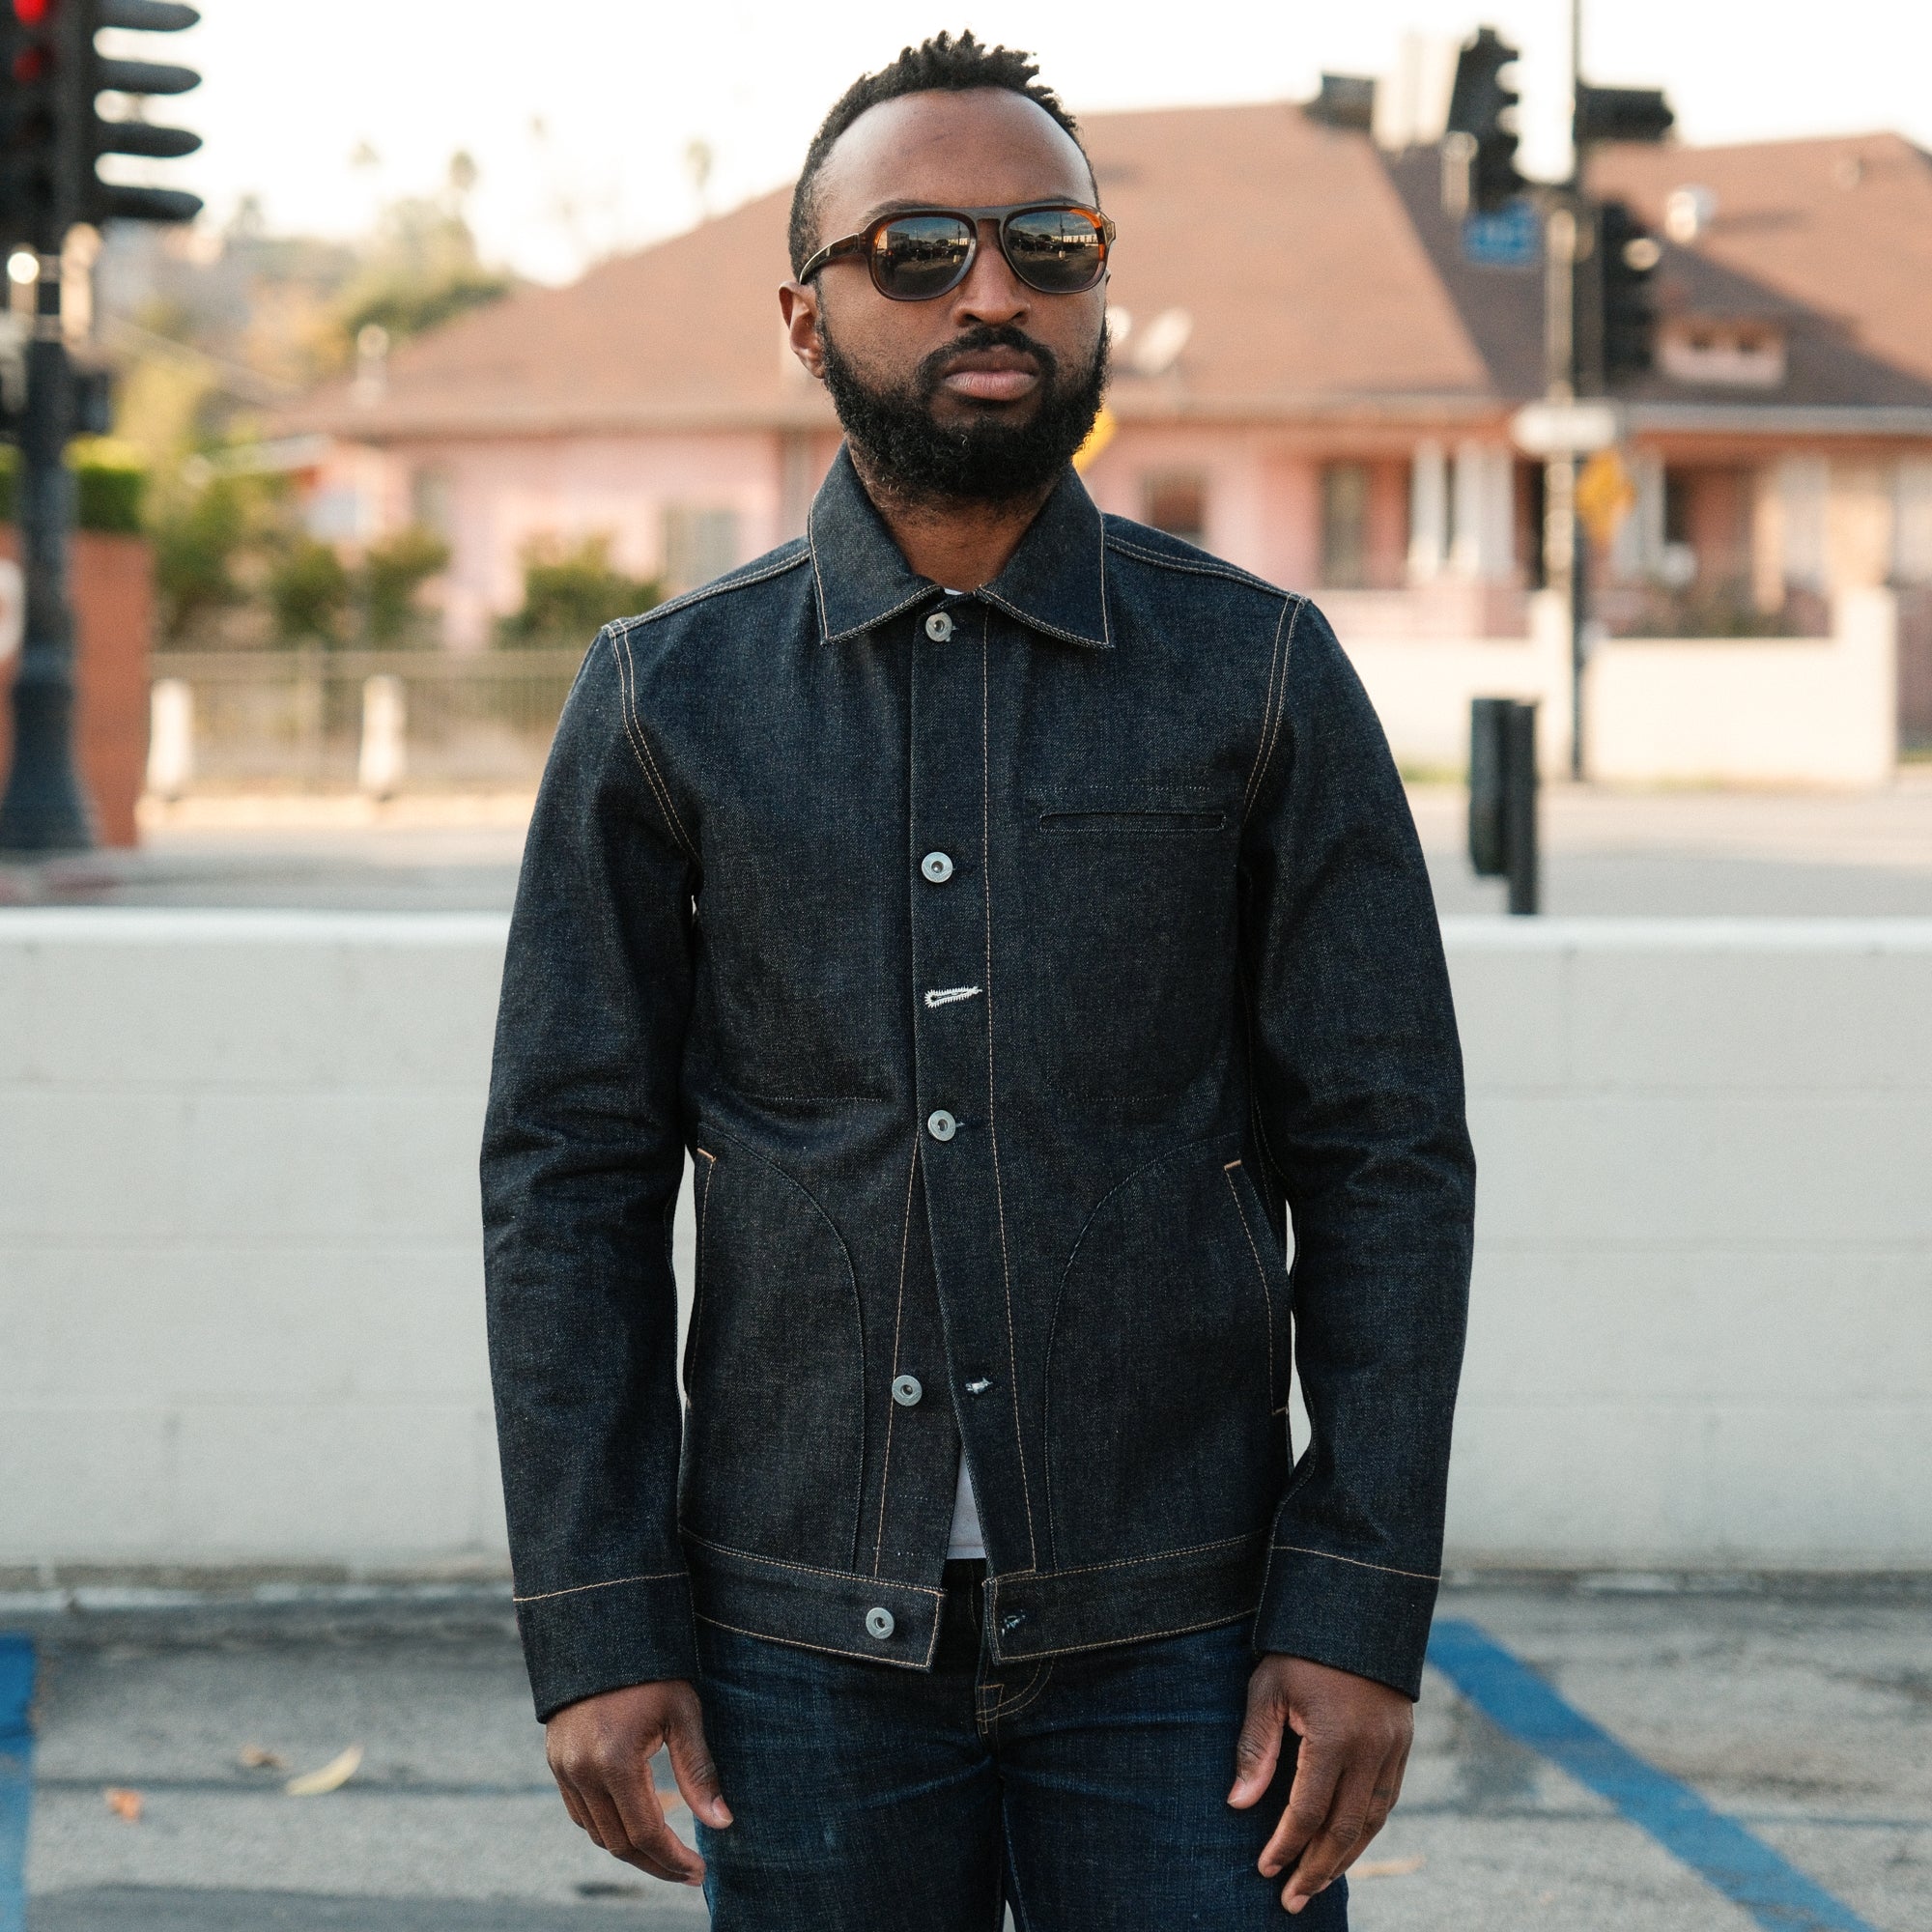 Thread & Supply Denim Jacket (Extended Sizes Available) at Dry Goods